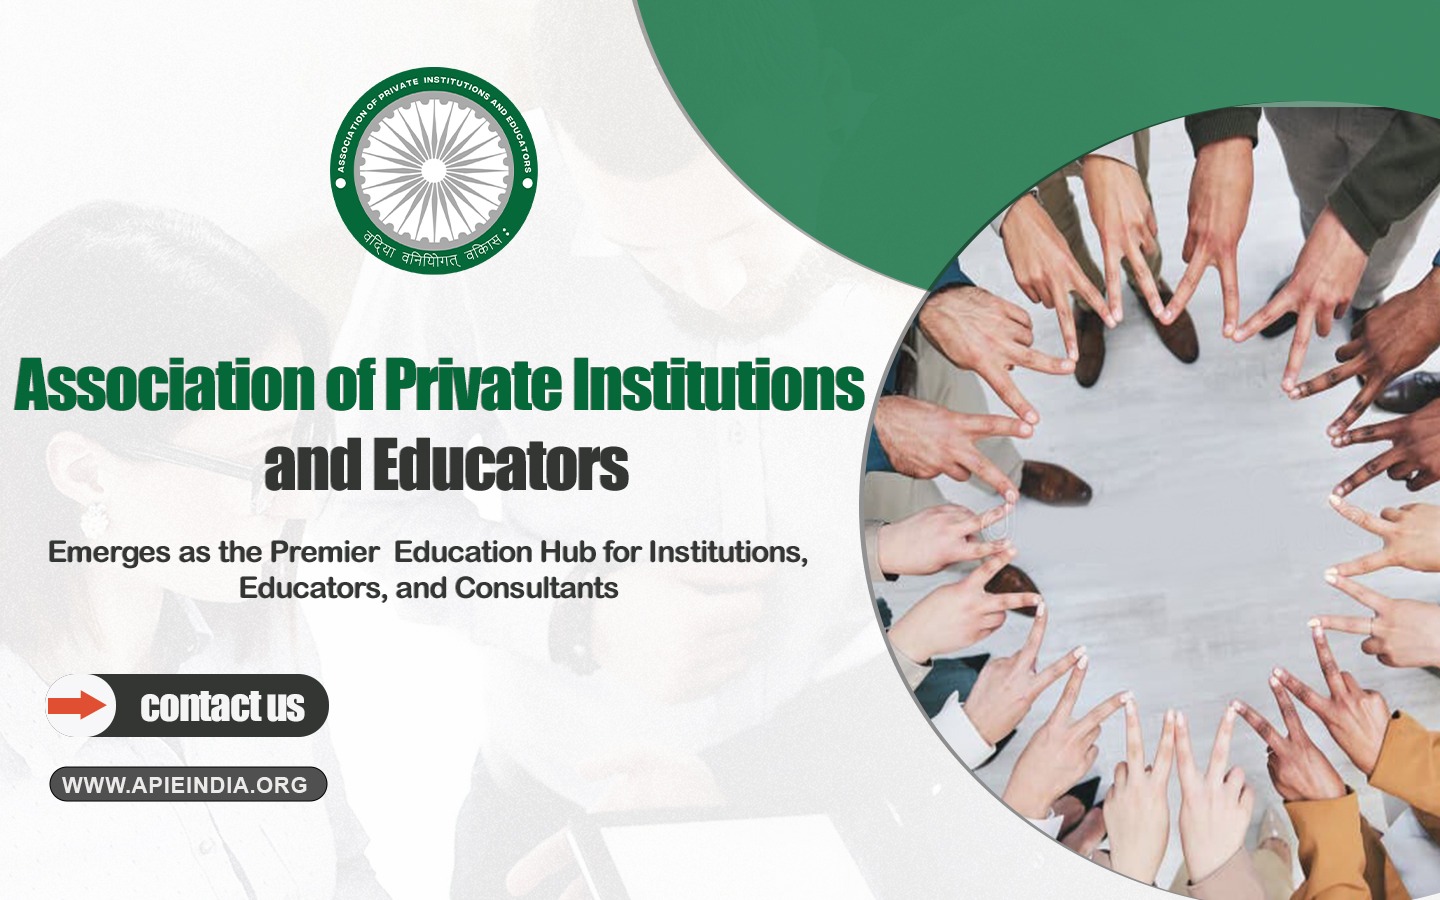 APIE - Association of Private Institutions and Educators Emerges as the Premier Education Hub for Institutions, Educators, and Consultants